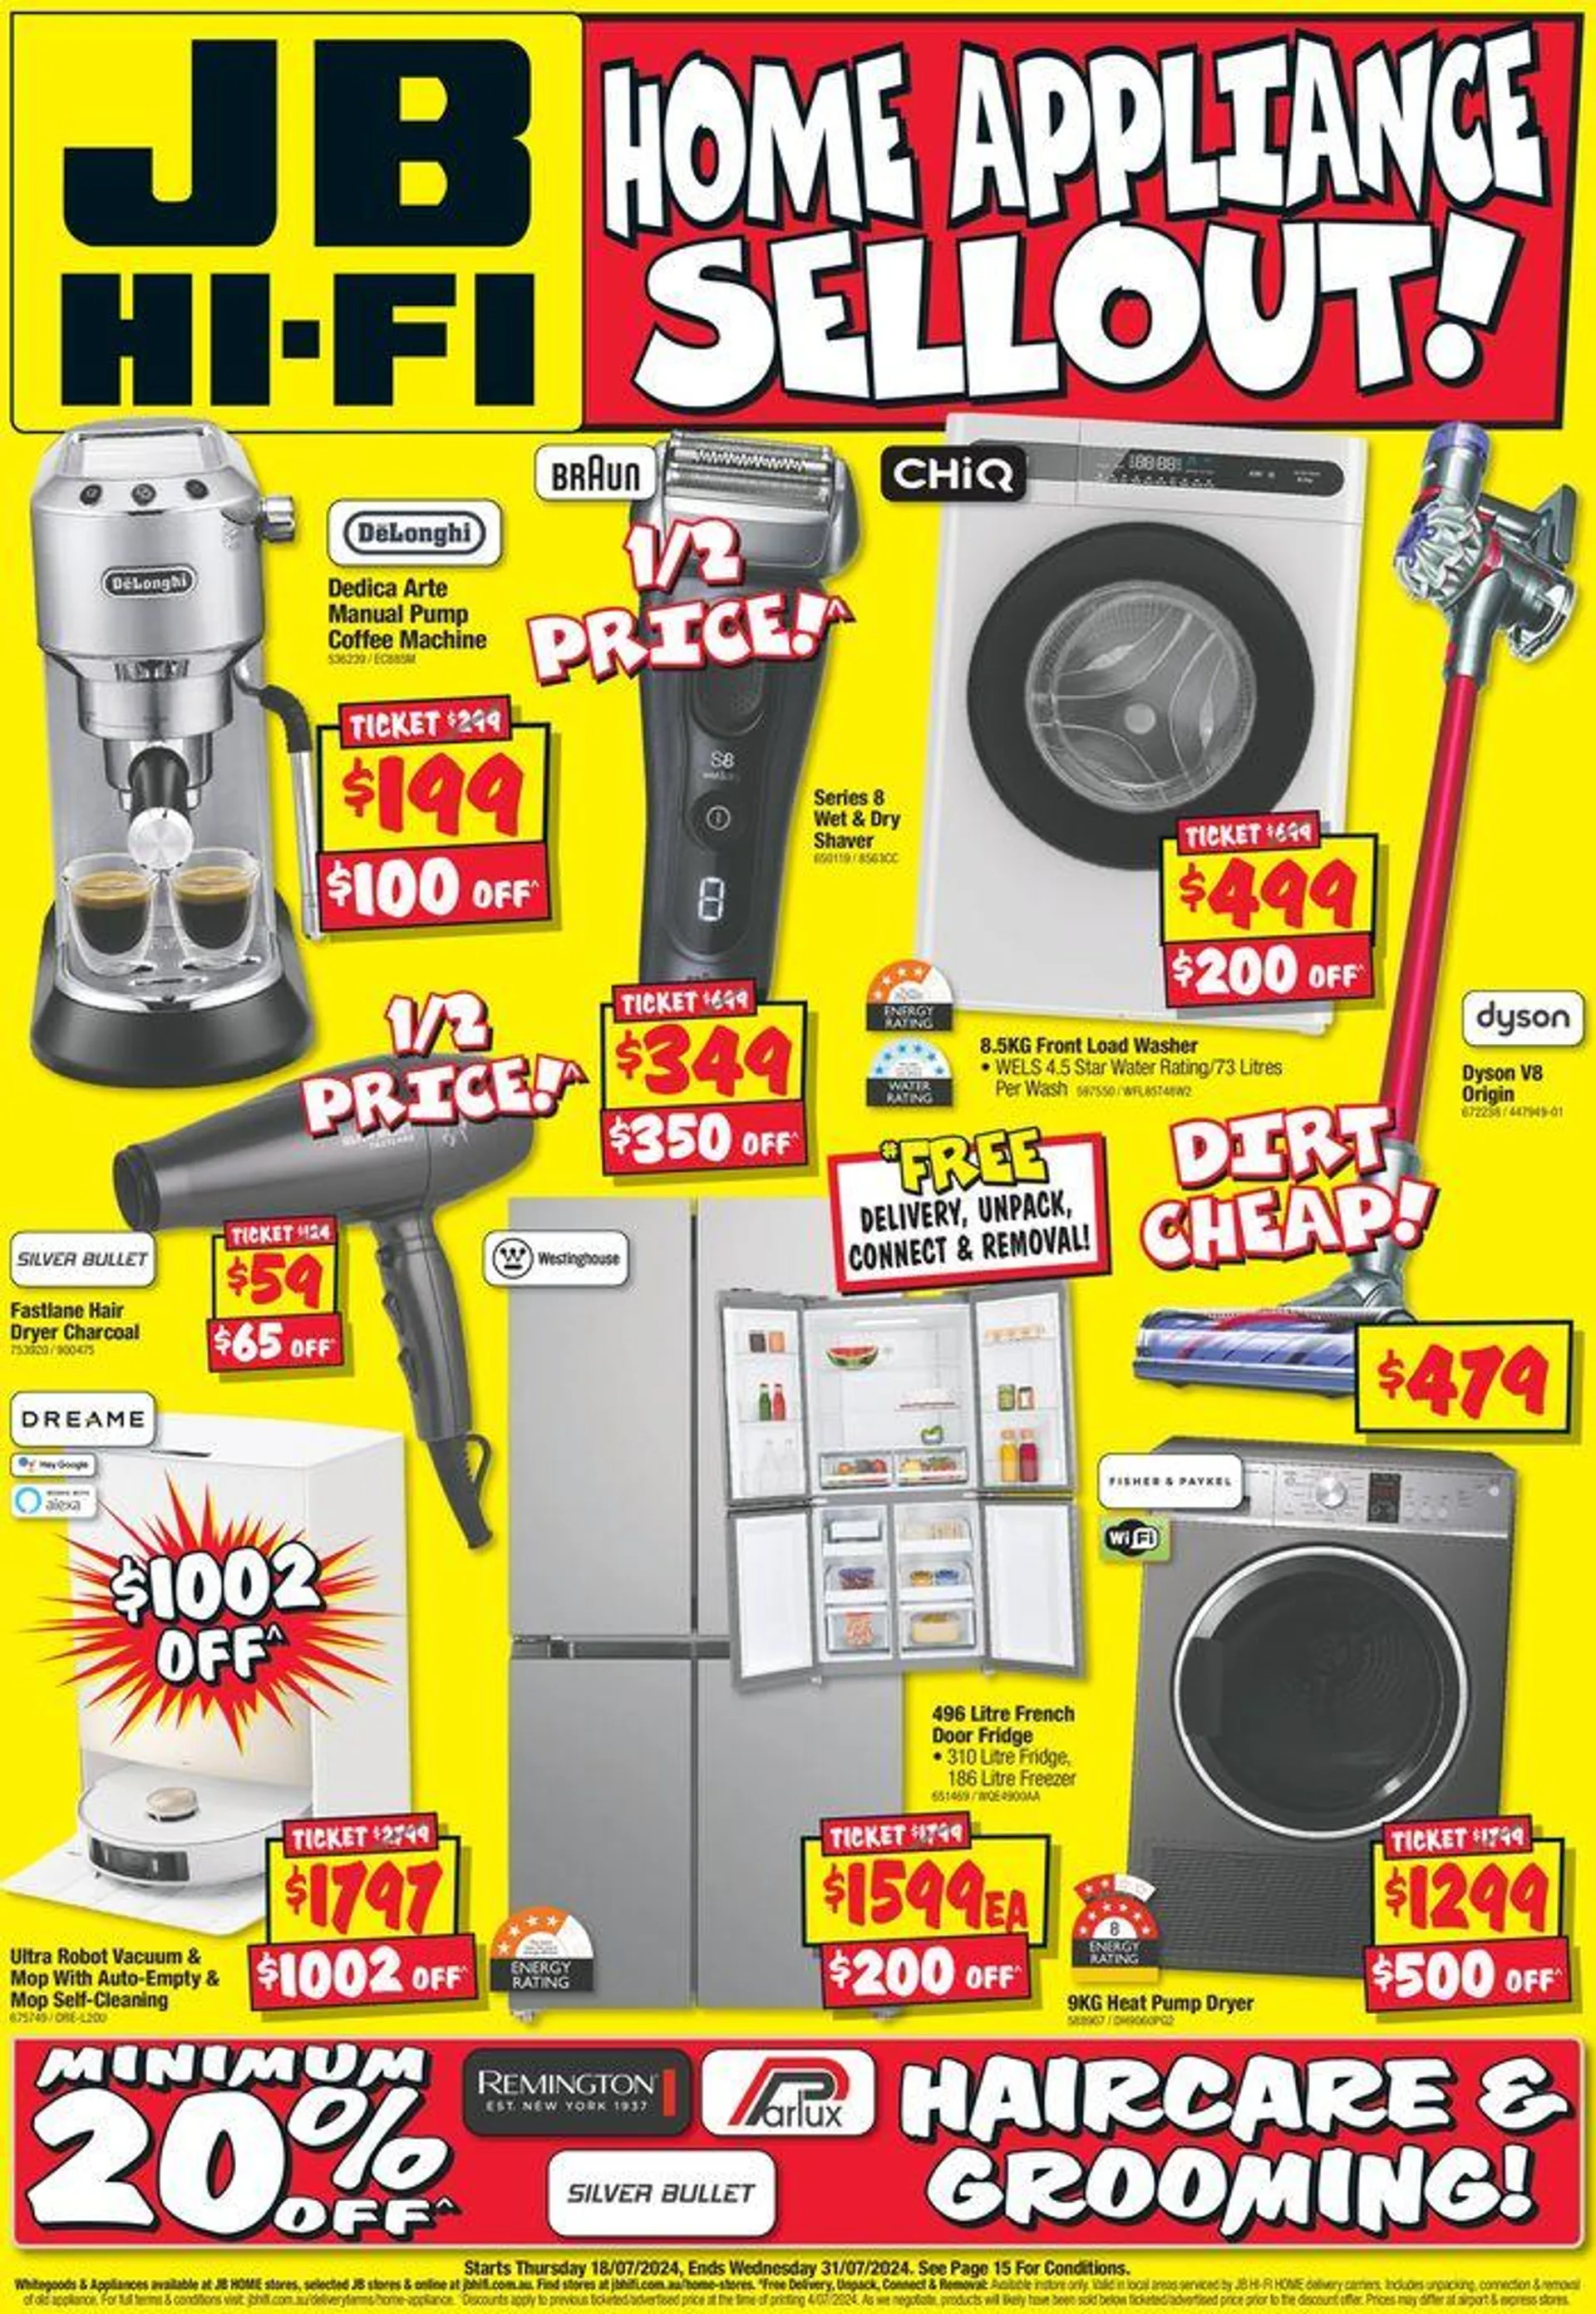 Home Appliance Sellout! - 1